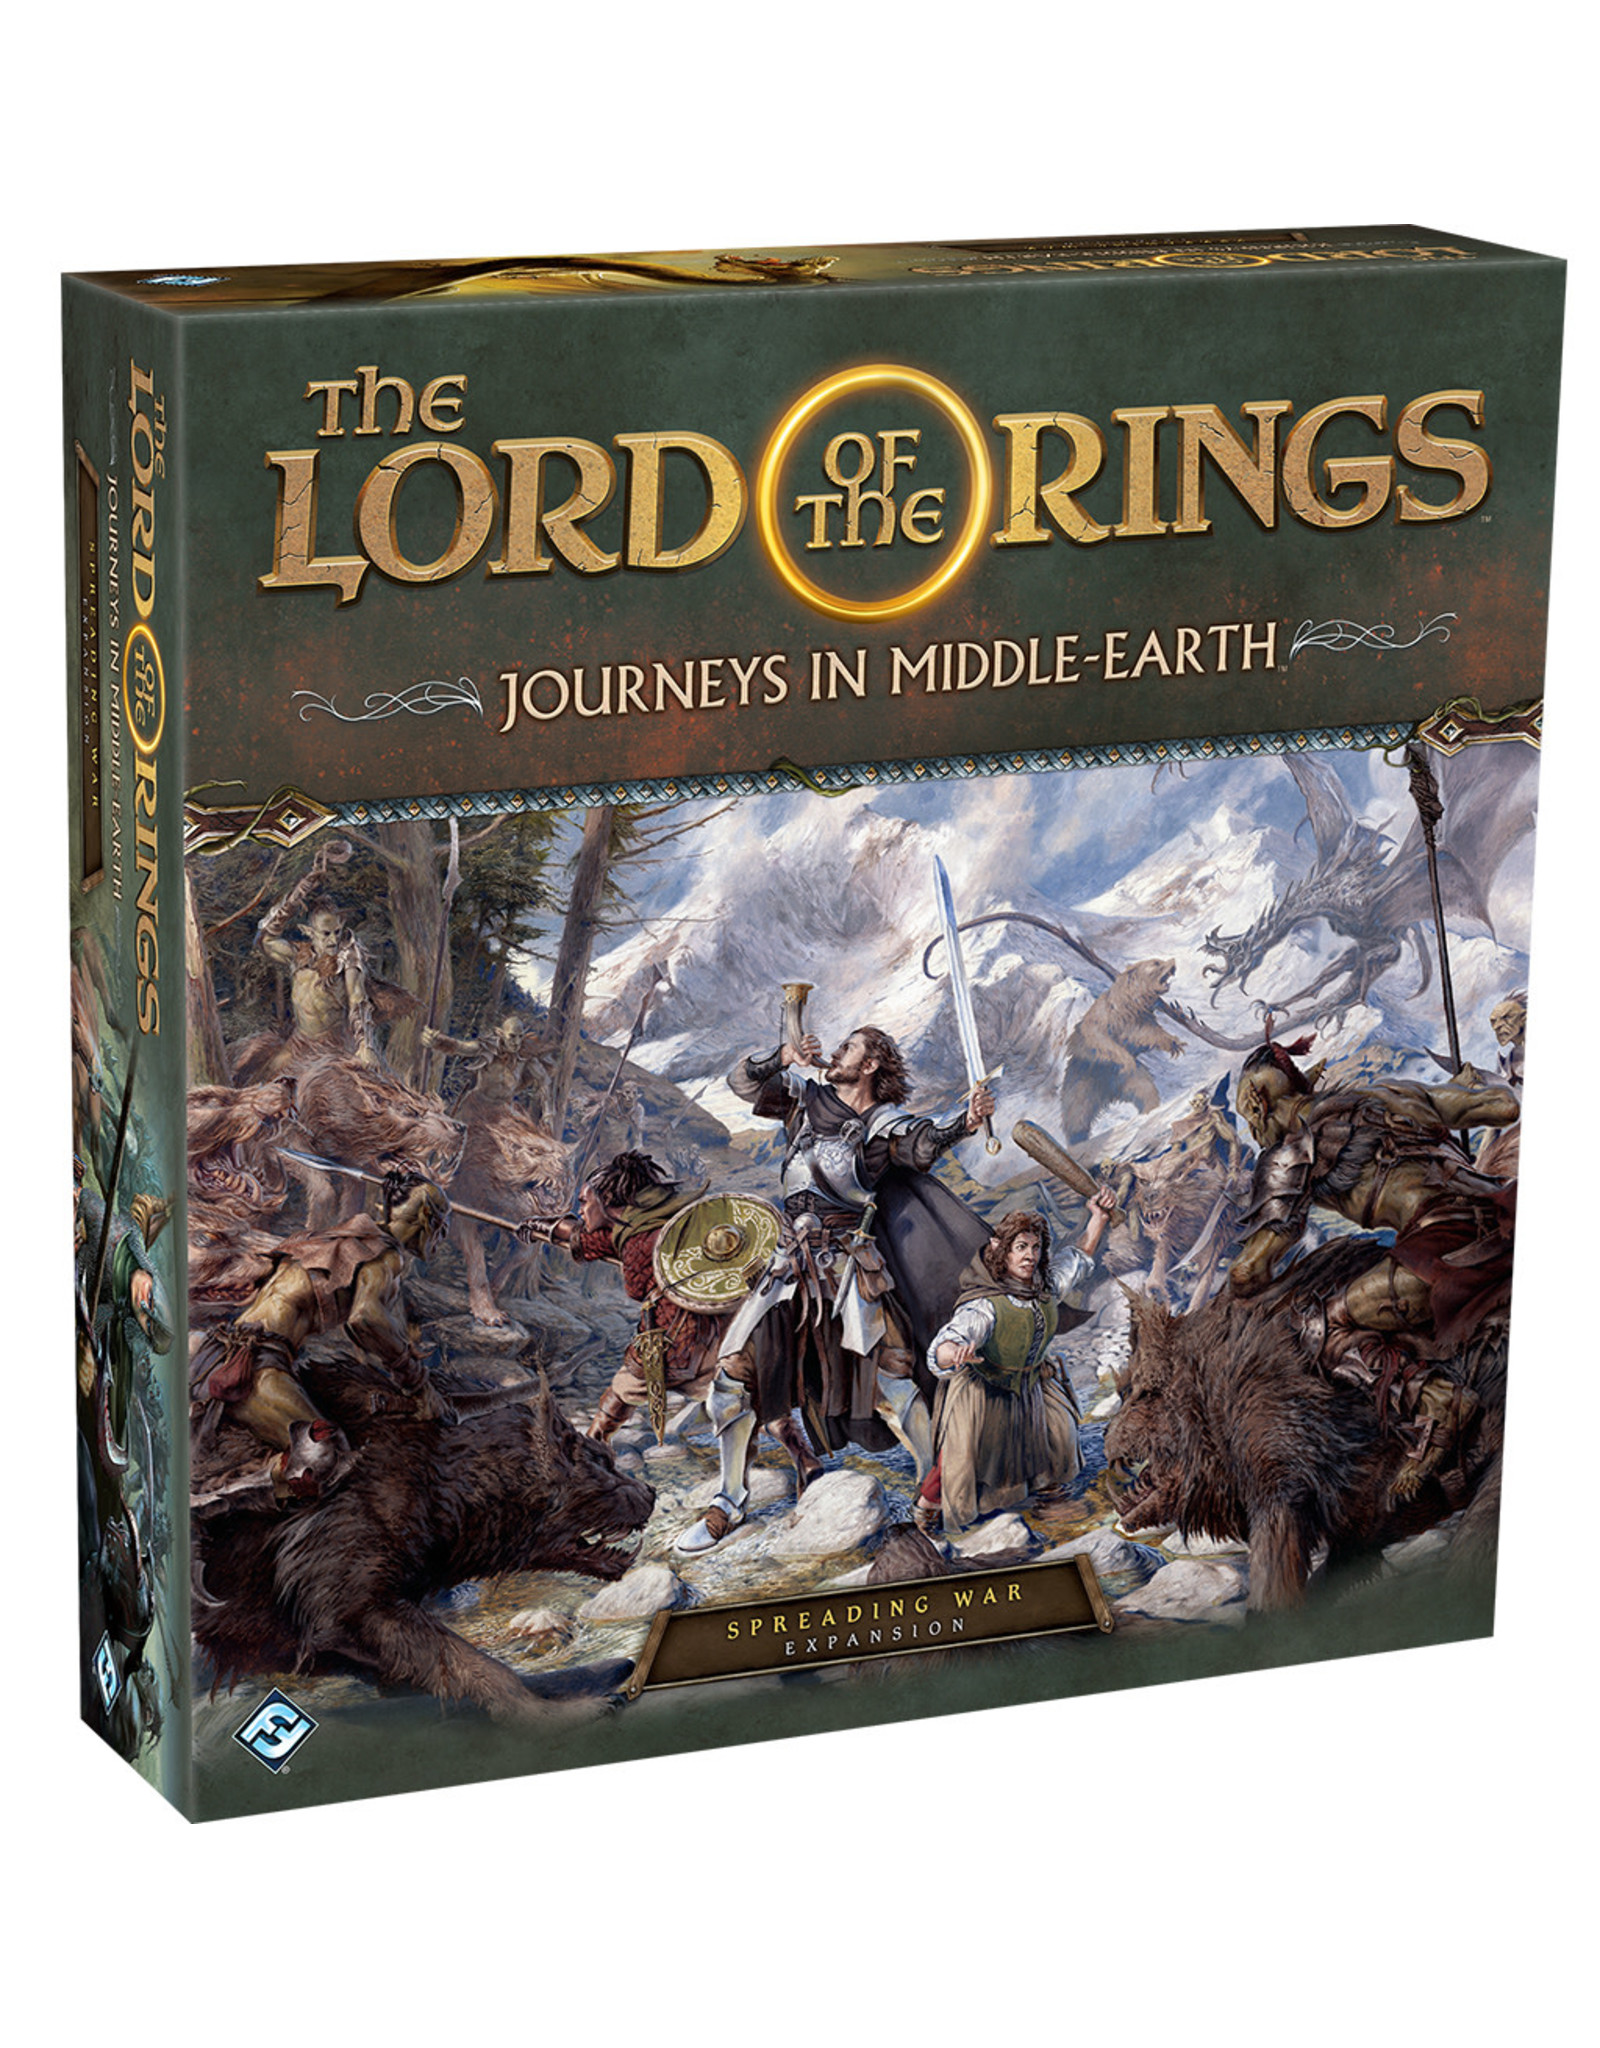 Fantasy Flight Games Lord of the Rings Journeys in Middle Earth: Spreading War